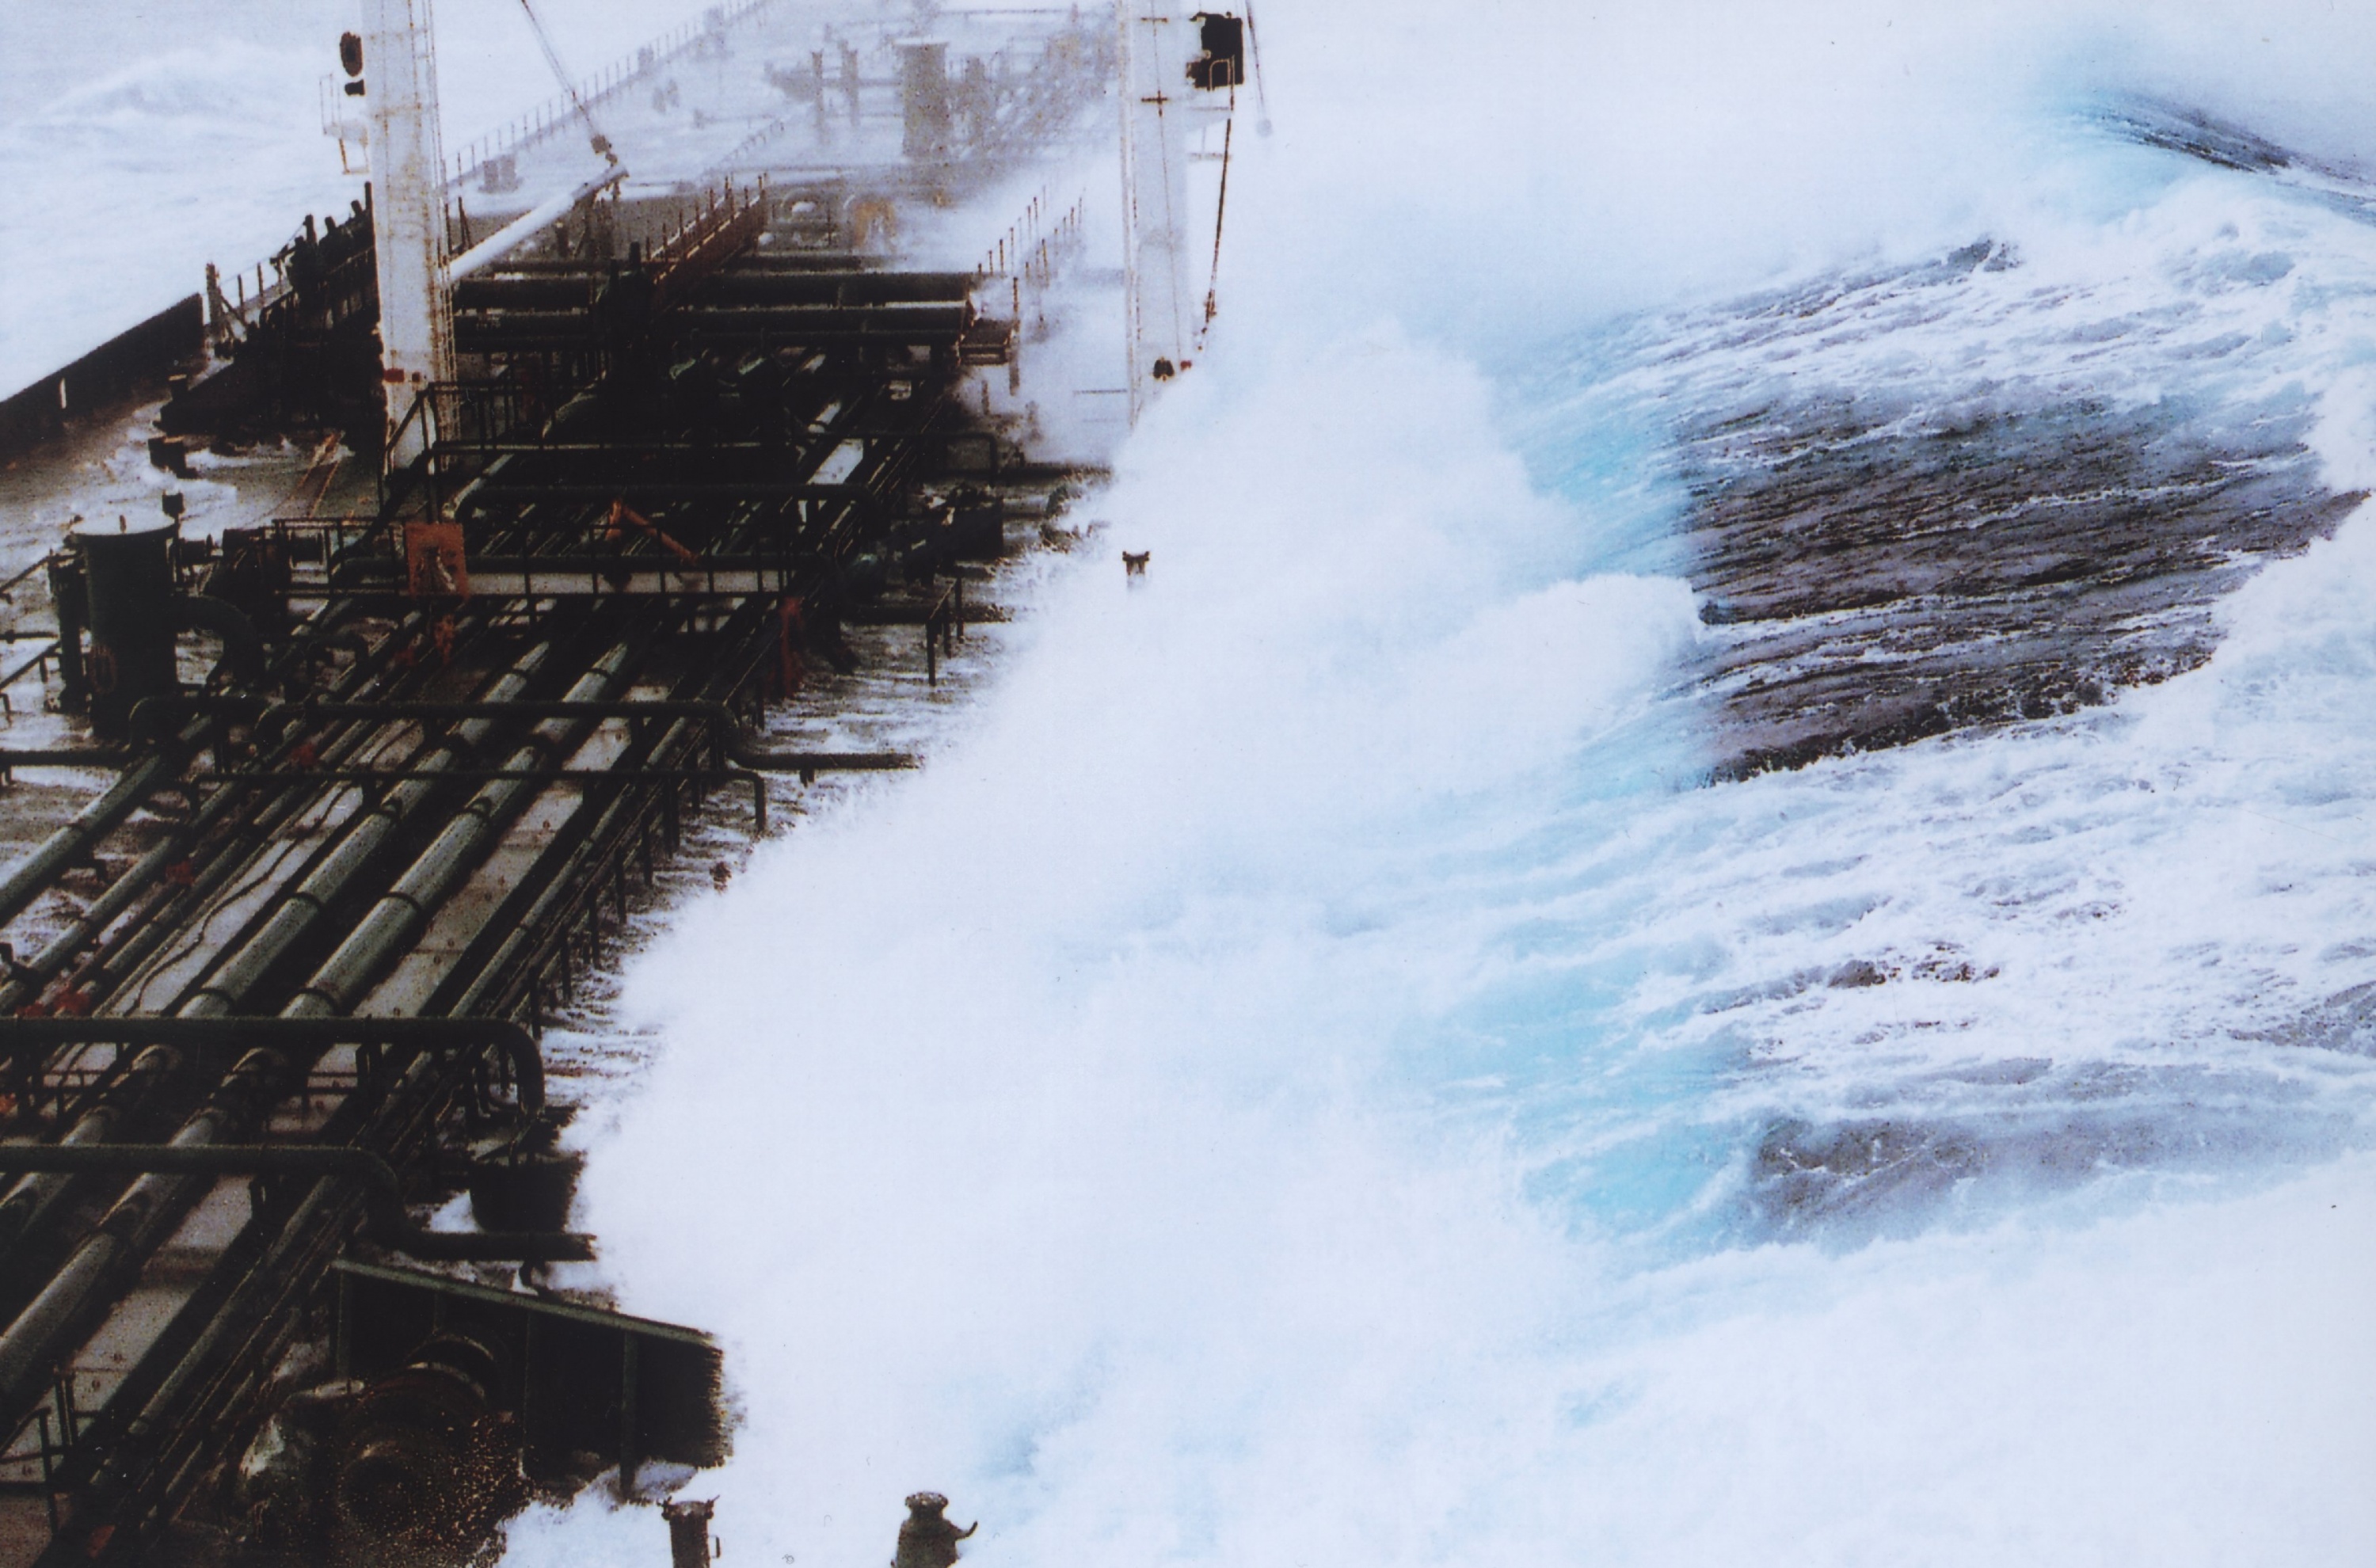 A 60-foot rogue wave hits the OVERSEAS CHICAGO tanker as it was headed south from Valdez, Alaska in 1993. The ship was running in 25-foot seas when the monster wave hit it on the starboard side. (Credit: Captain Roger Wilson courtesy of NOAA)